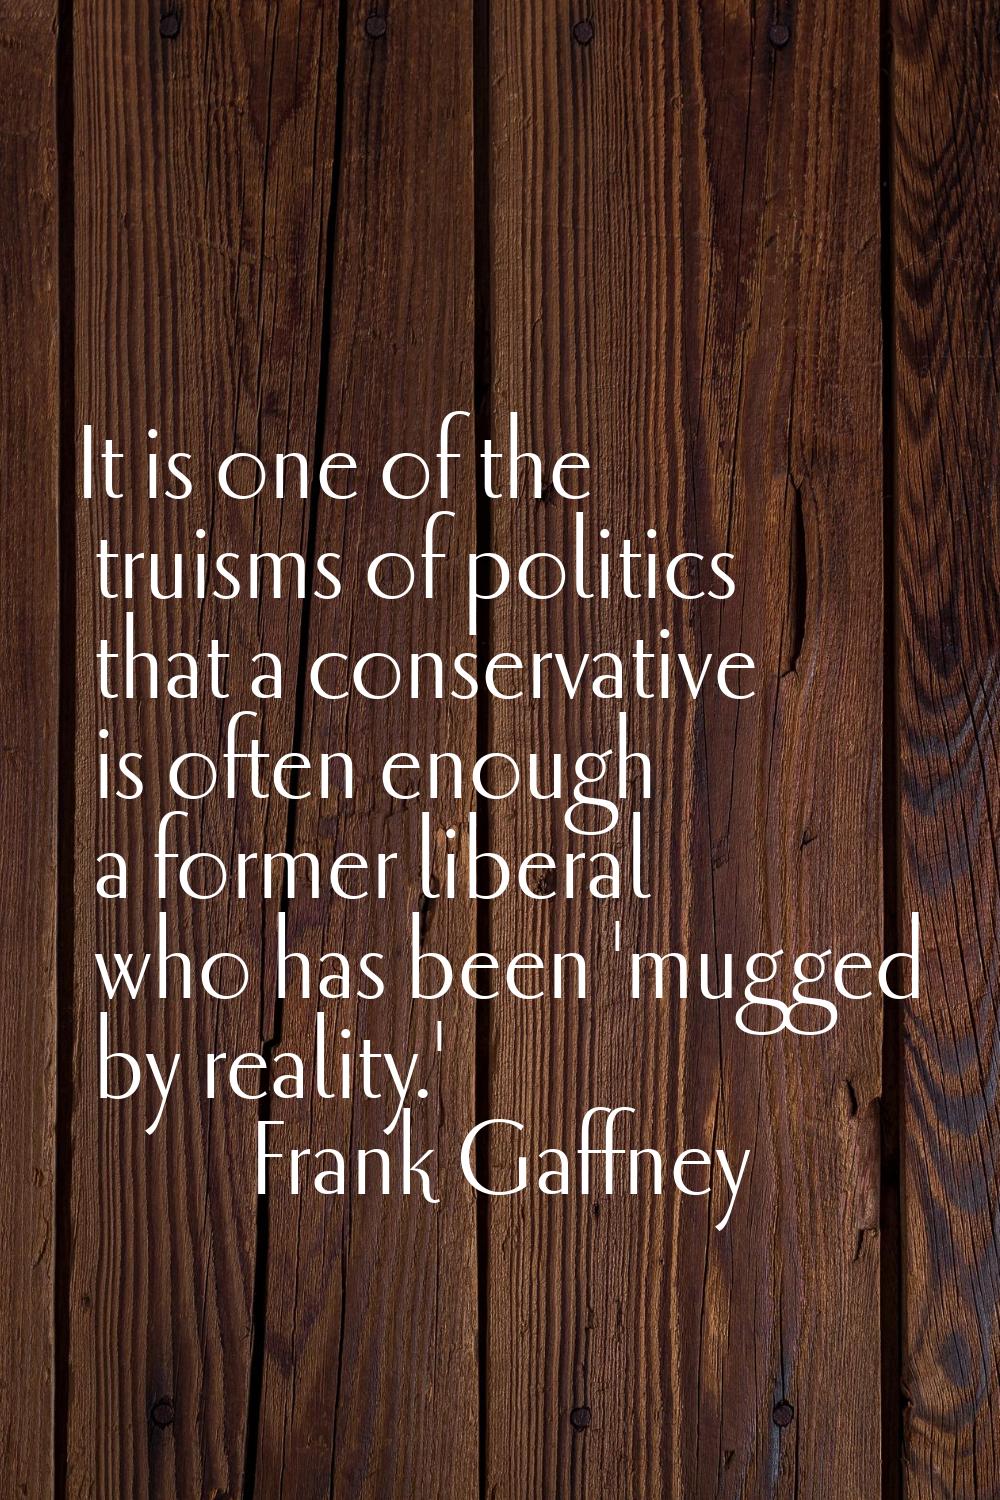 It is one of the truisms of politics that a conservative is often enough a former liberal who has b